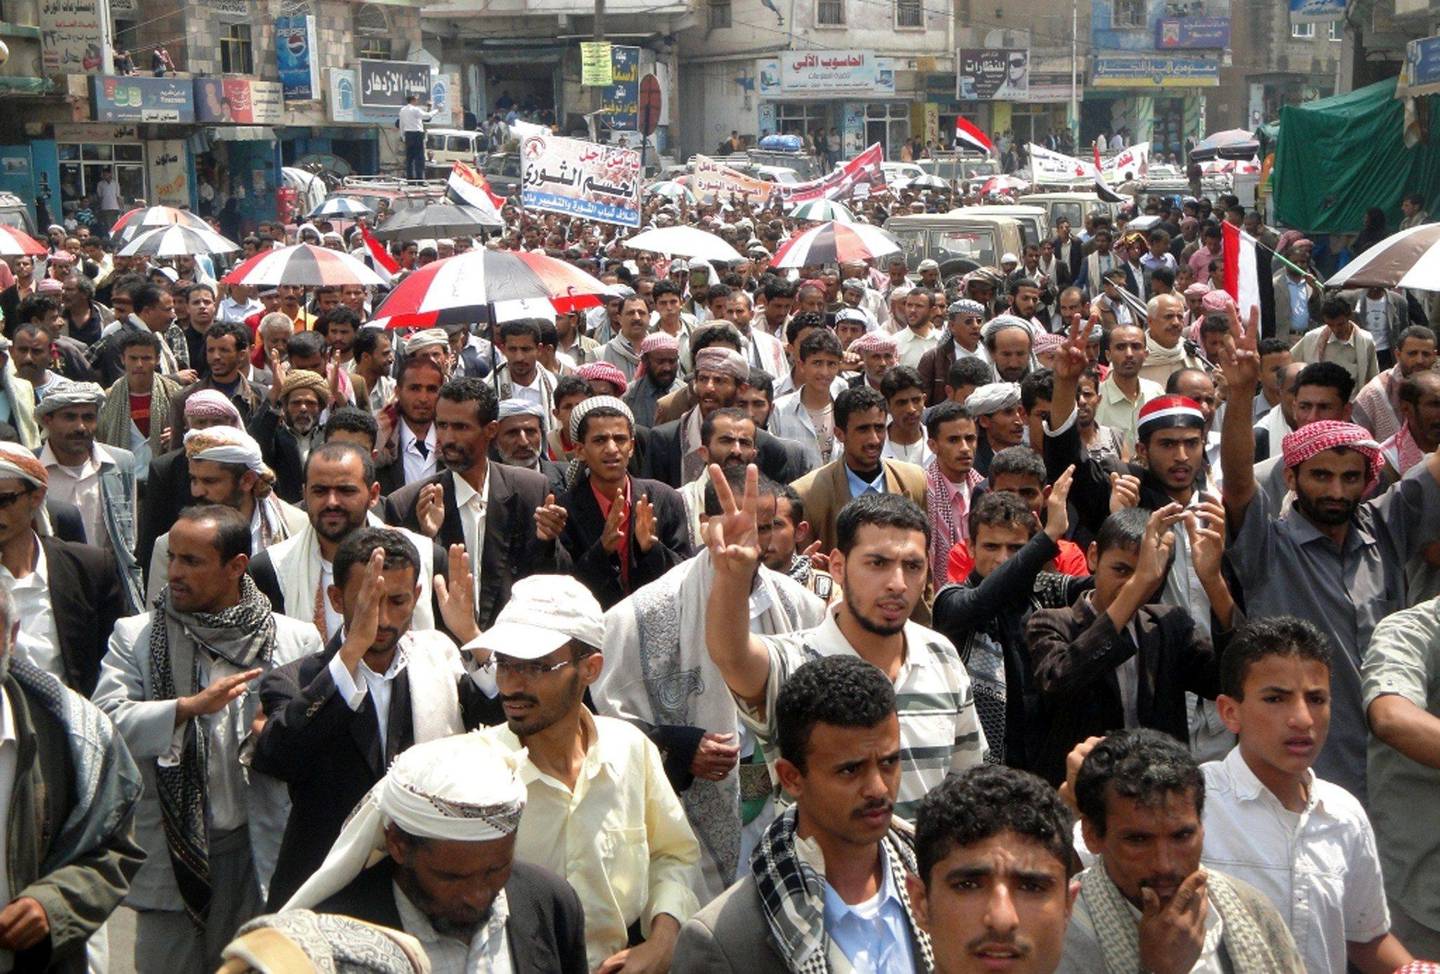 Thousands of Yemenis rally in the city of Ibb, 190 kms southwest of Sanaa, on September 19, 2011 against the deadly clashes between anti-government protesters and security forces in the capita Sanaa. AFP PHOTO/STR
 *** Local Caption ***  866087-01-08.jpg